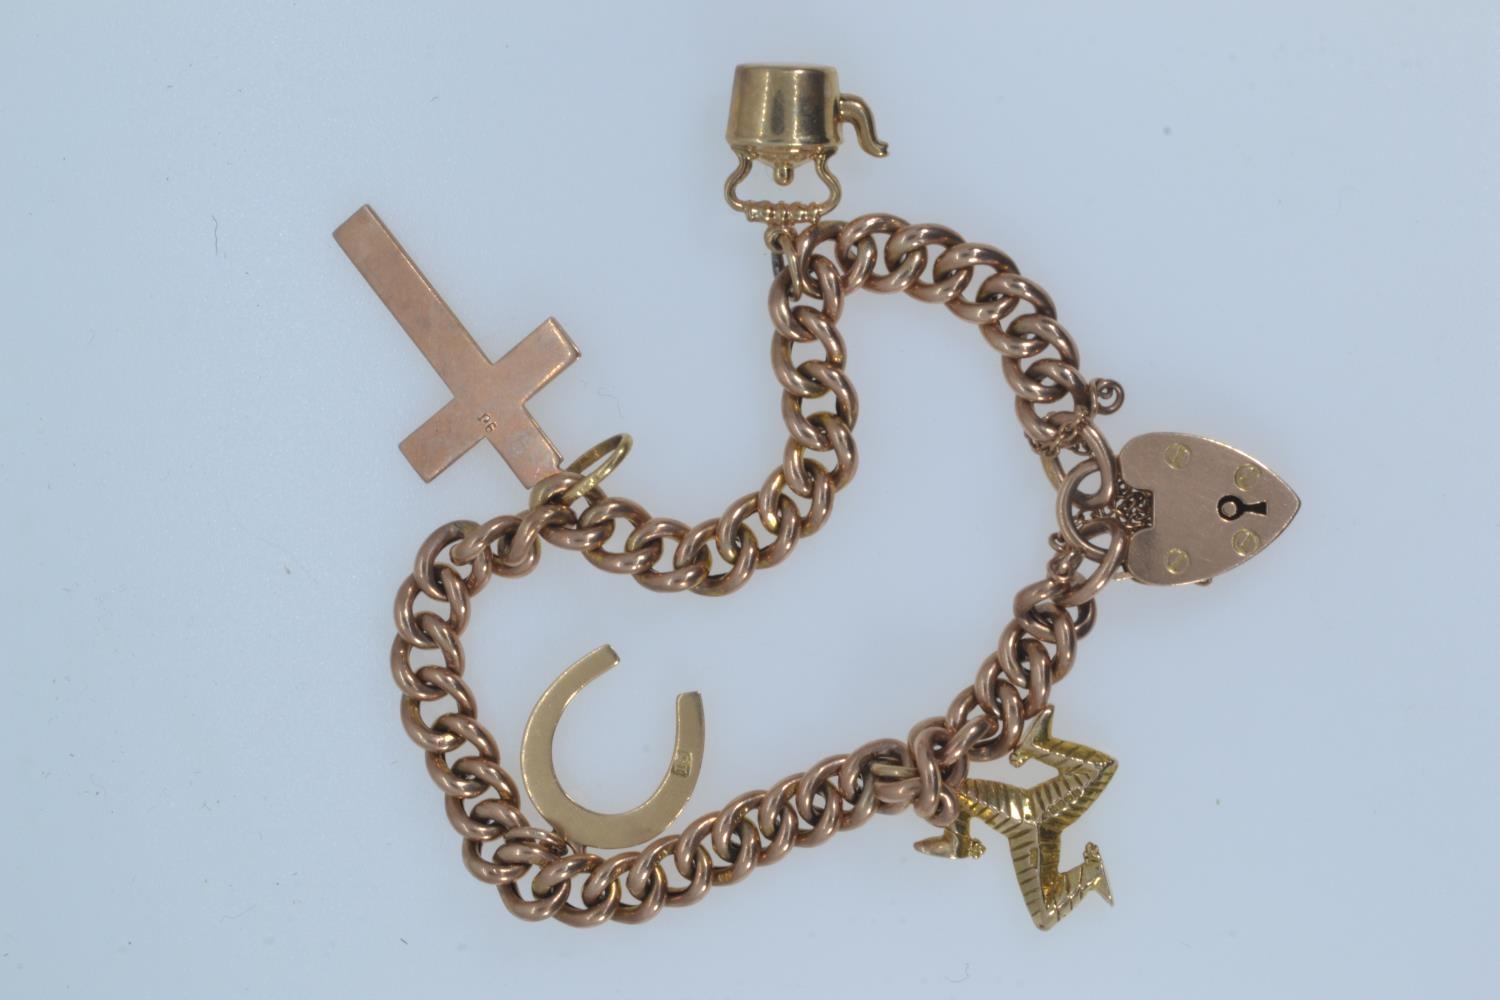 9ct rose gold bracelet with a heart-shaped padlock clasp, suspending four charms, including three 9c